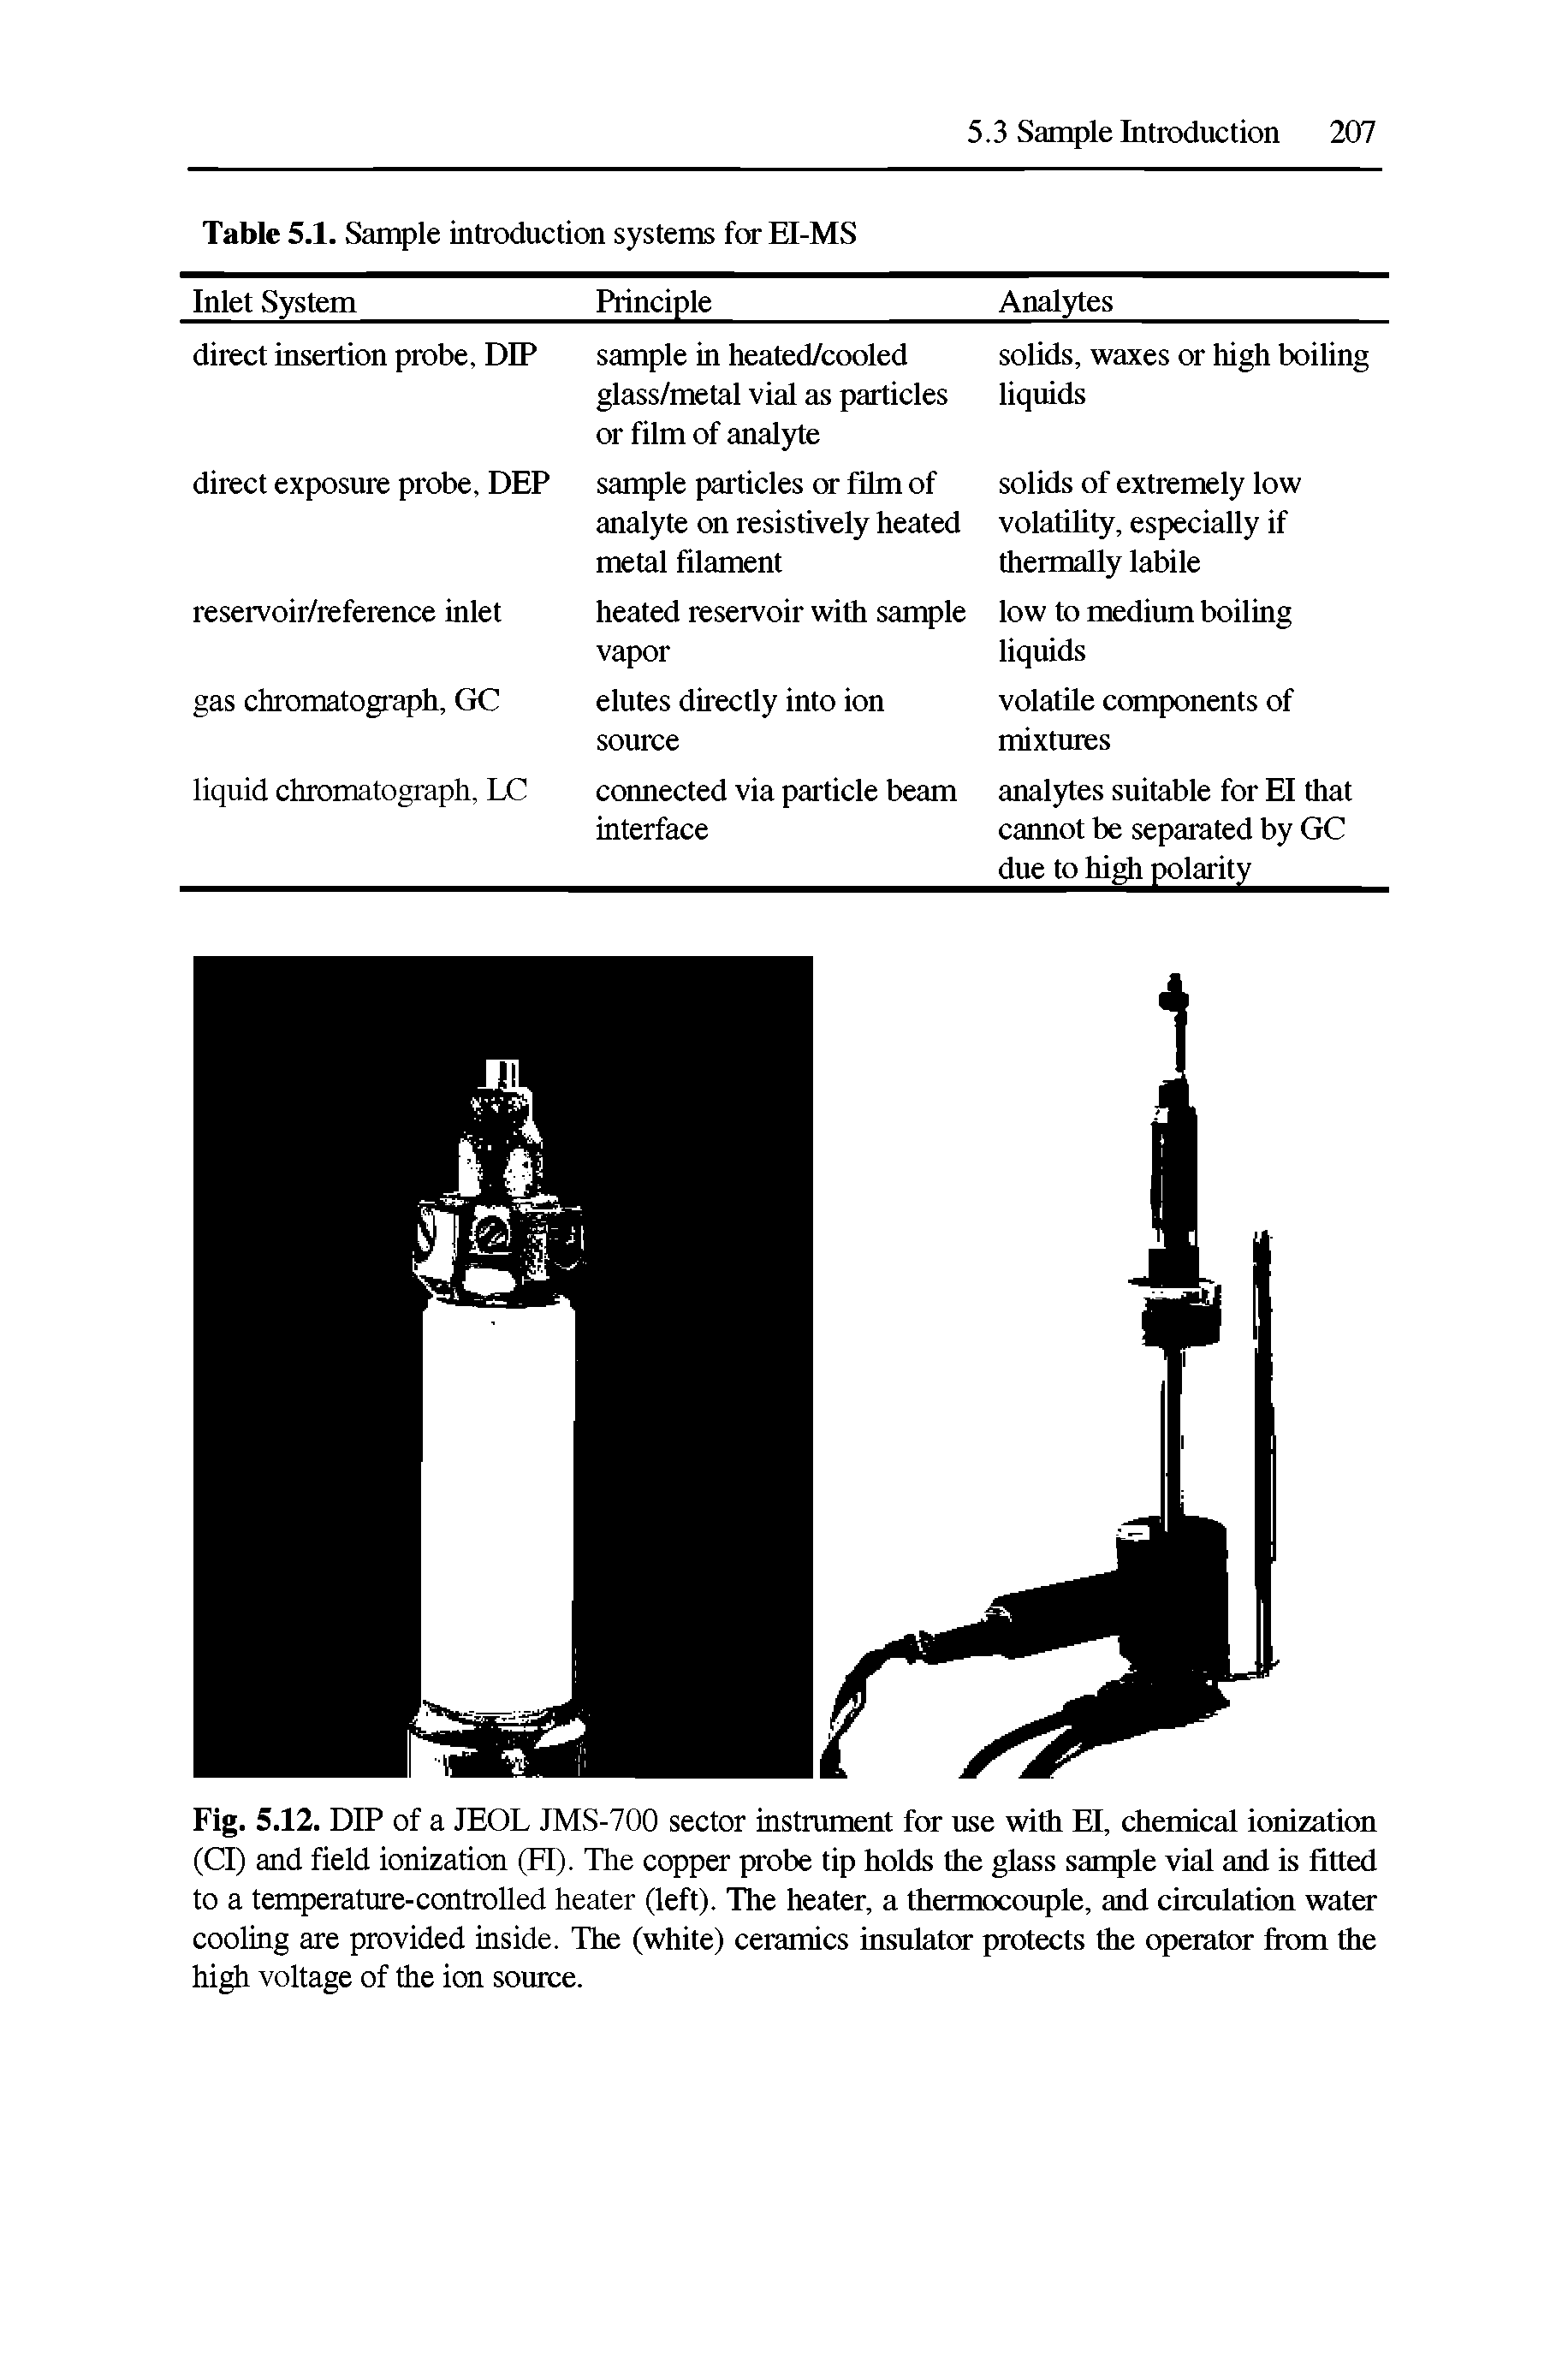 Fig. 5.12. DIP of a JEOL JMS-700 sector instrament for use with El, chemical ionization (Cl) and field ionization (FI). The copper probe tip holds the glass sample vial and is fitted to a temperature-controlled heater (left). The heater, a thermocouple, and circulation water cooling are provided inside. The (white) ceramics insulator protects the operator from the high voltage of the ion source.